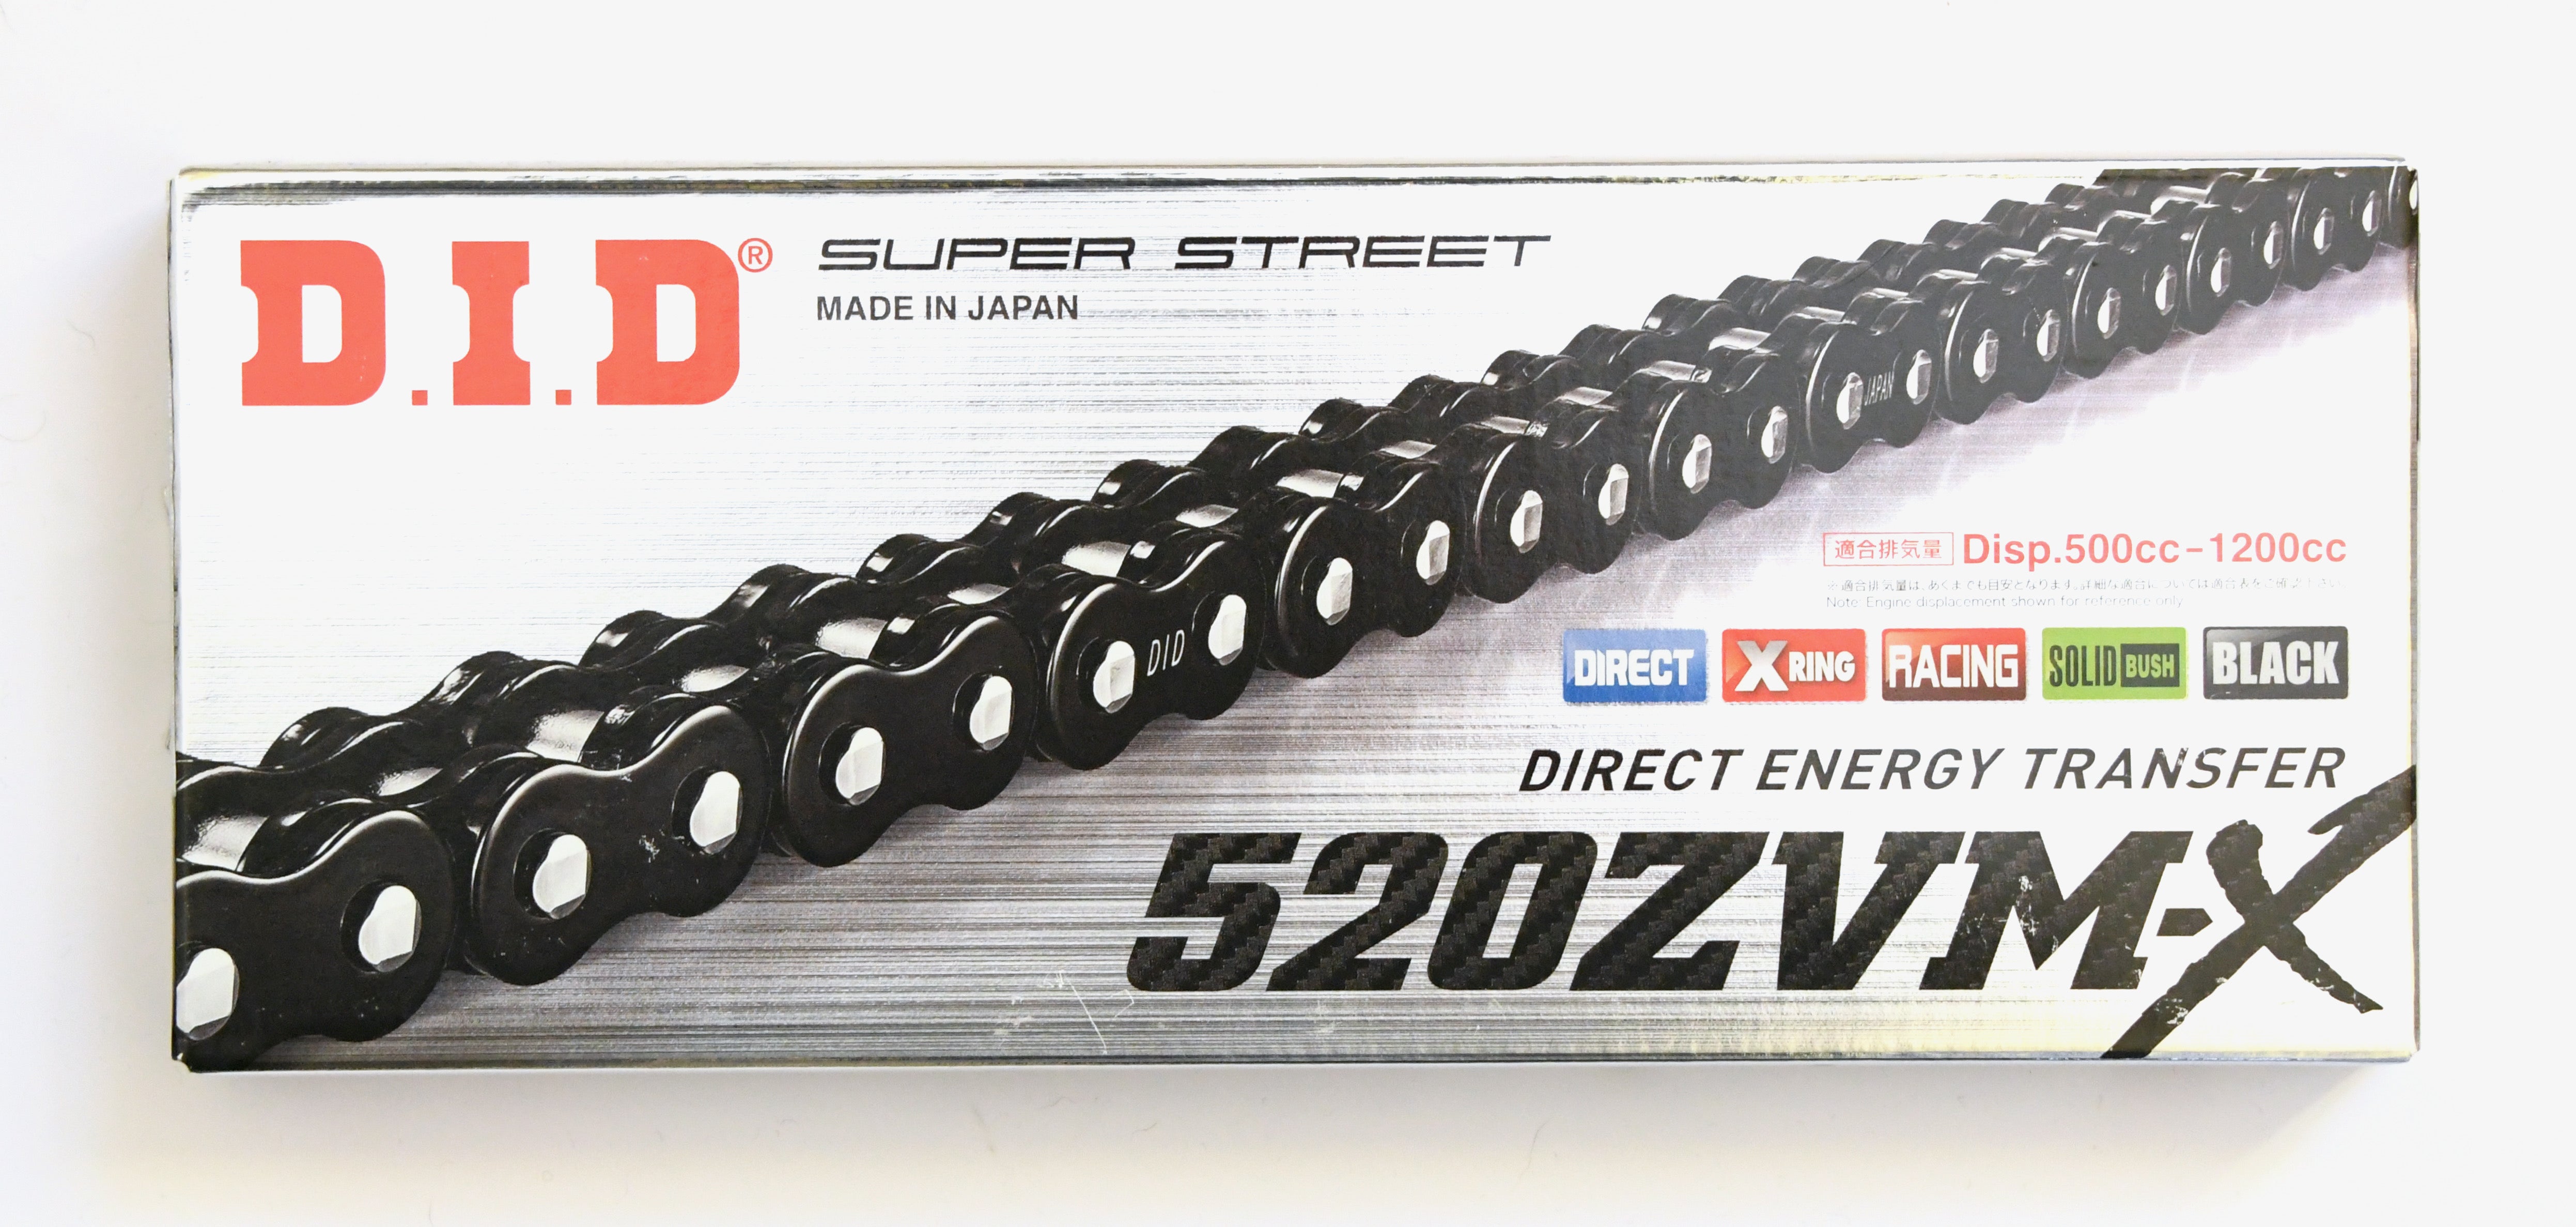 520 Pitch 112 Link Chain - Choose Your Chain (800cc+ models)